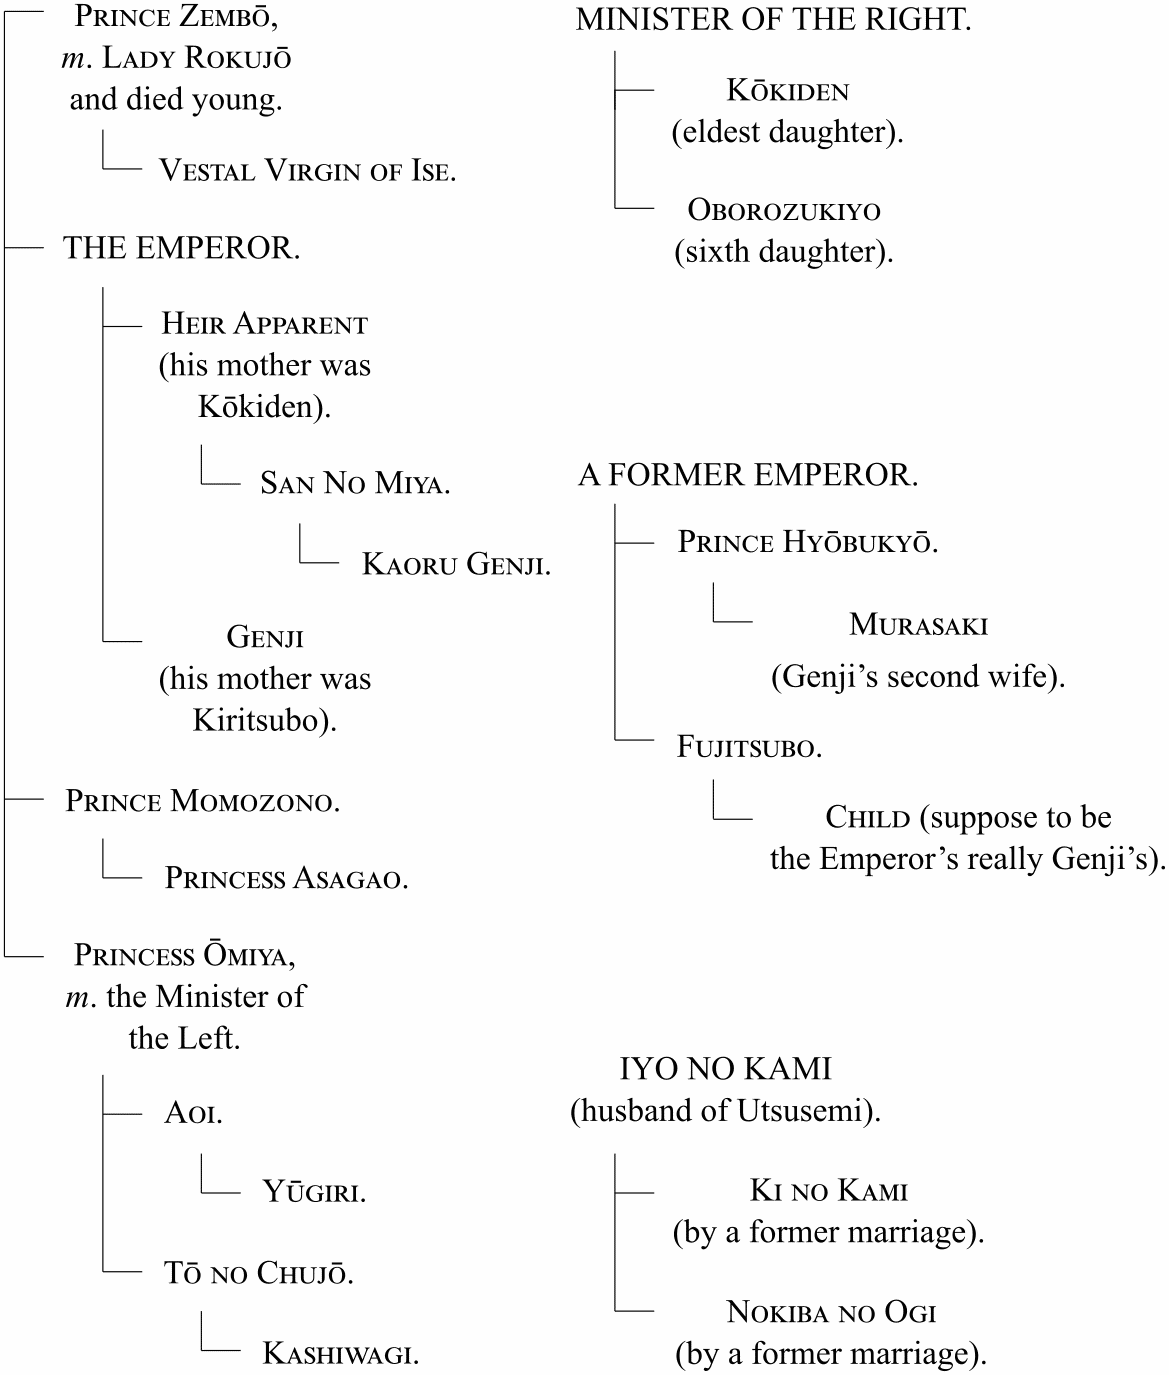 Genealogical graph of the Emperor’s siblings, the Minister of the Right’s family, a former emperor’s family, and Iyo no Kami’s family